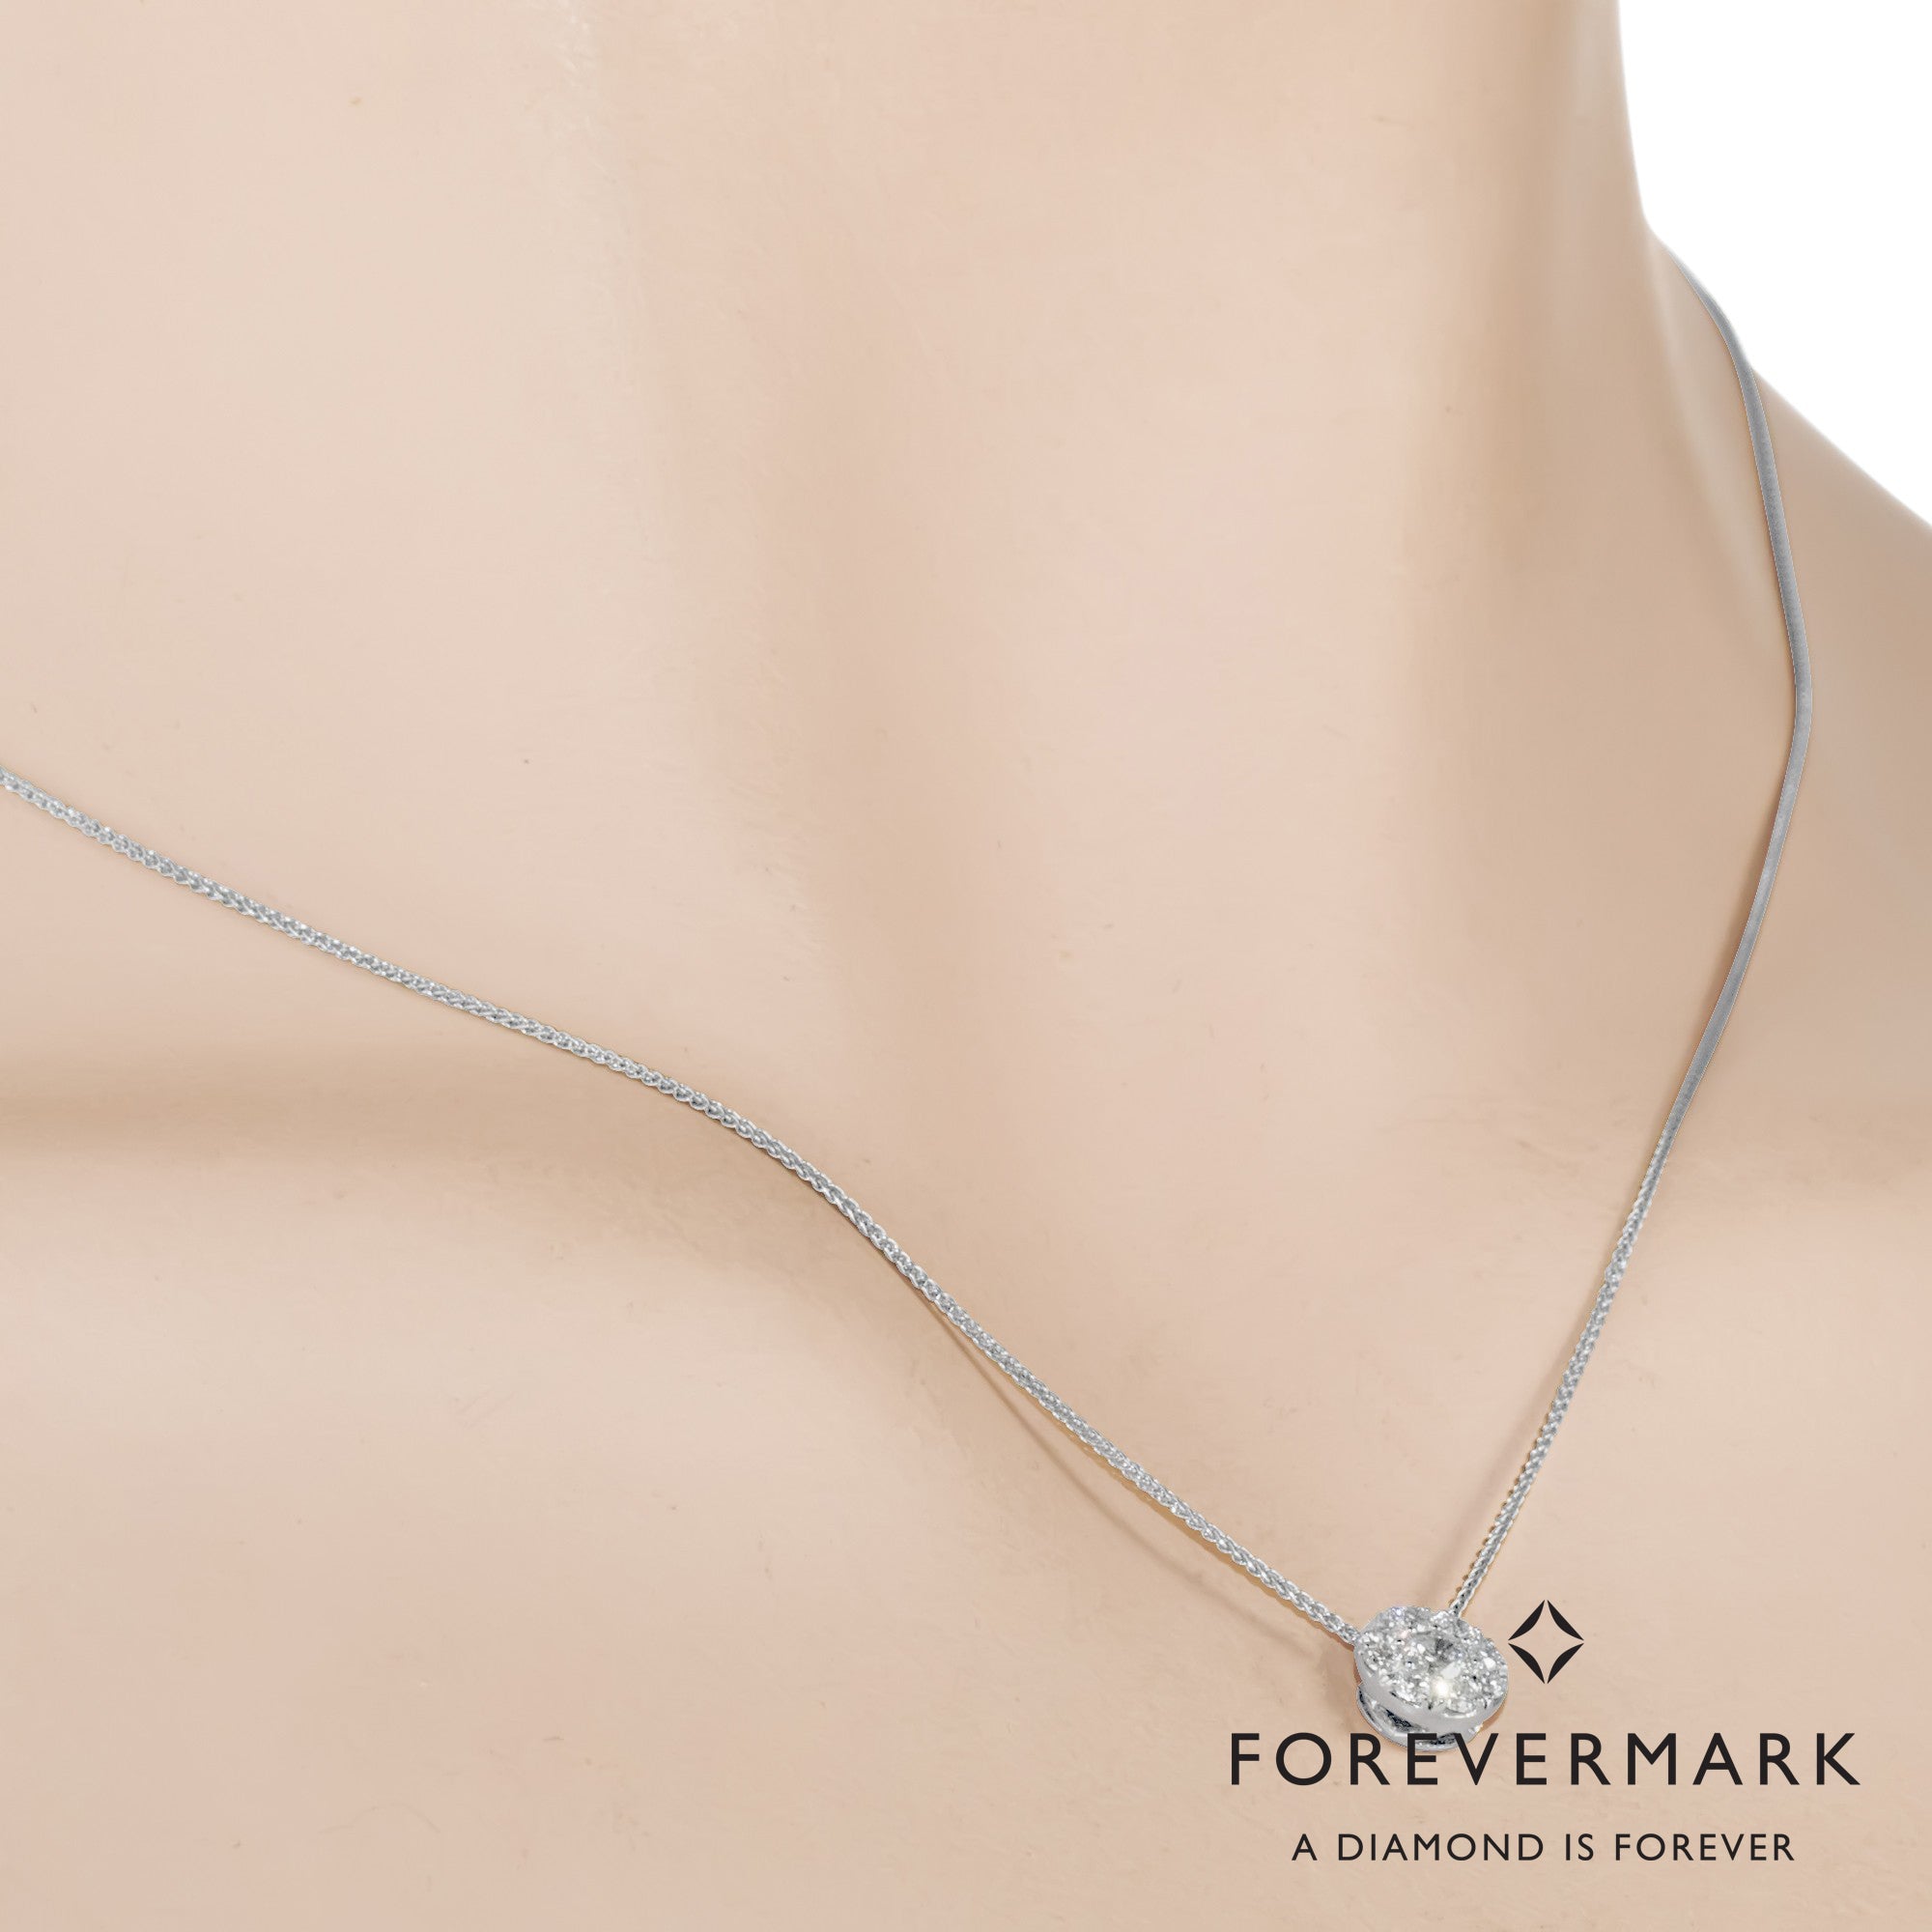 De Beers Forevermark Eternal Collection Diamond Halo Necklace in 18kt White Gold (3/8ct tw)